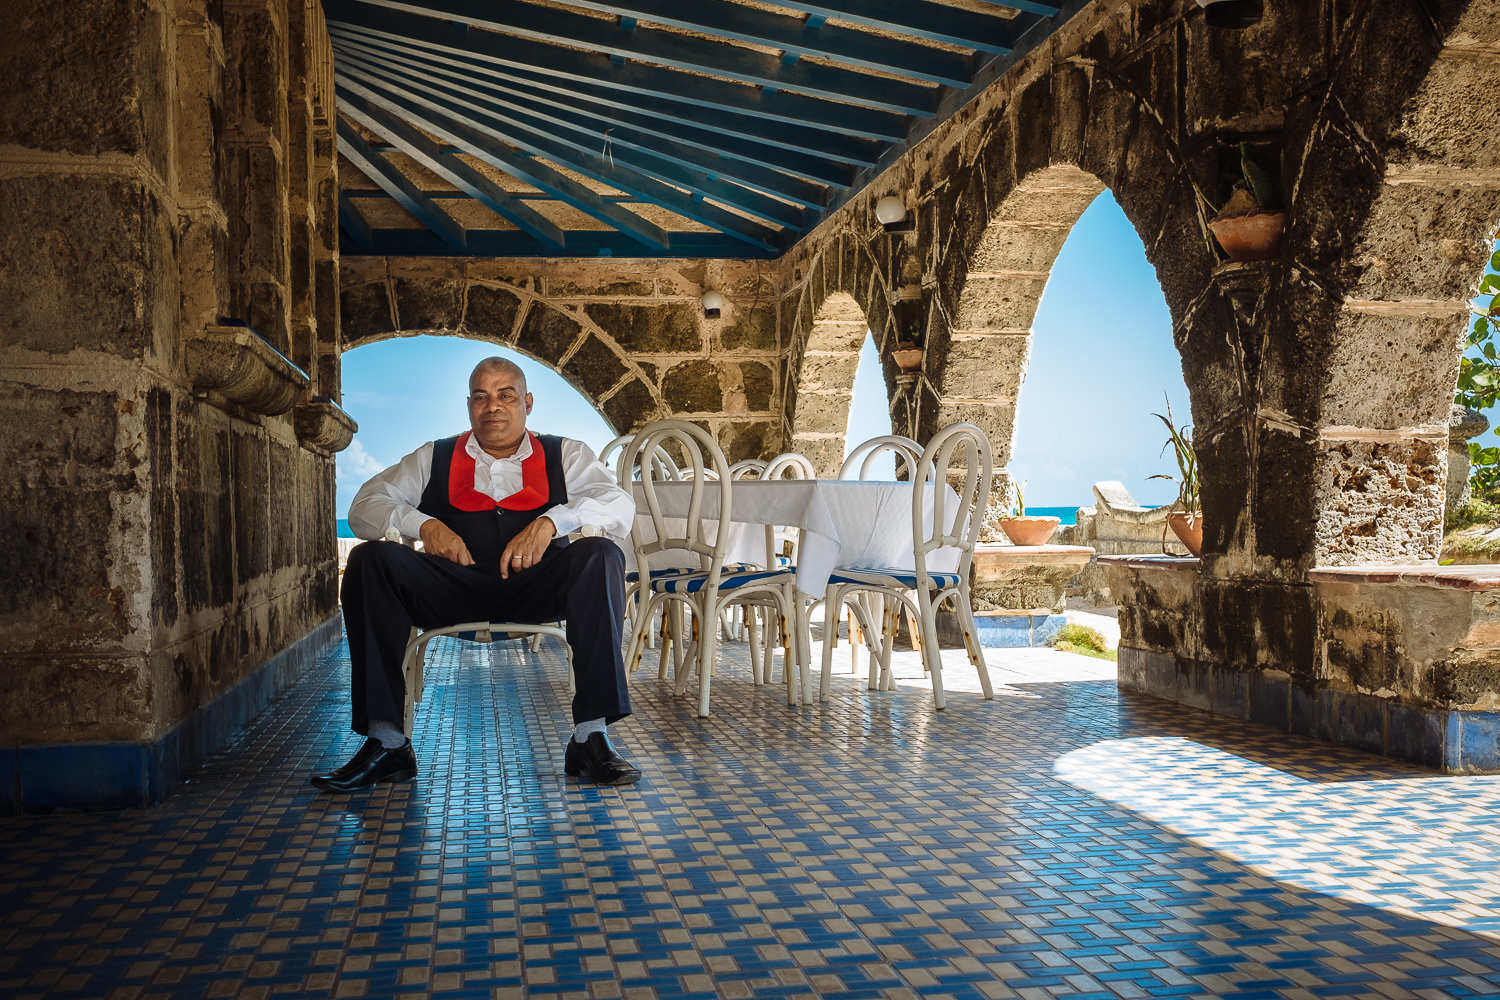  A portrait of a Casa de Al waiter. Which used to supposedly be Al Capone's house in Varadero, Cuba 2015. 